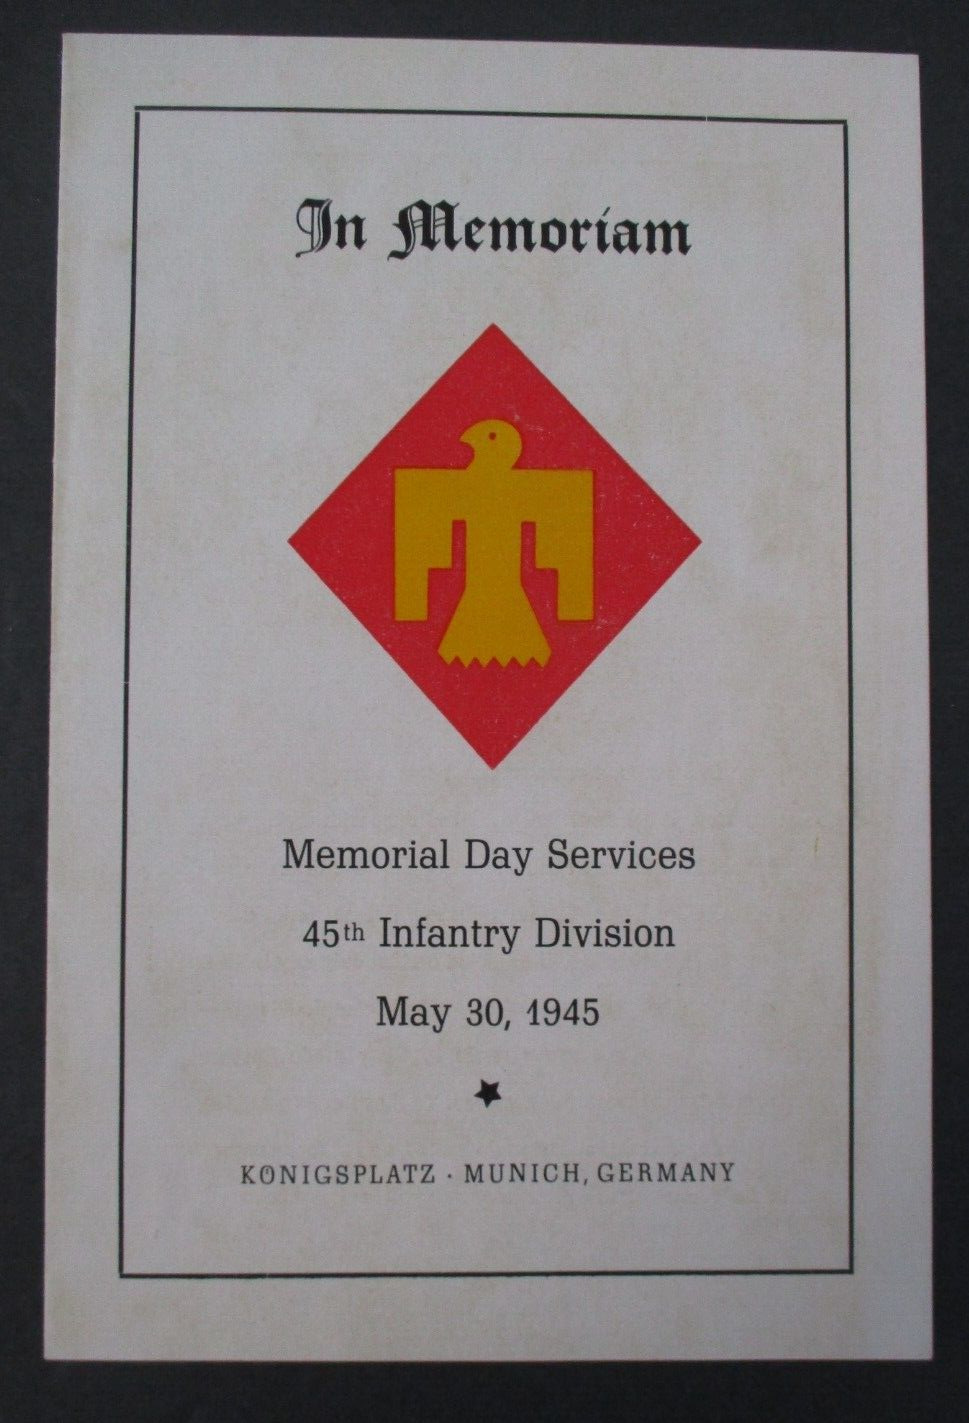 1945 Memorial Day Services Program, 45th Infantry Division